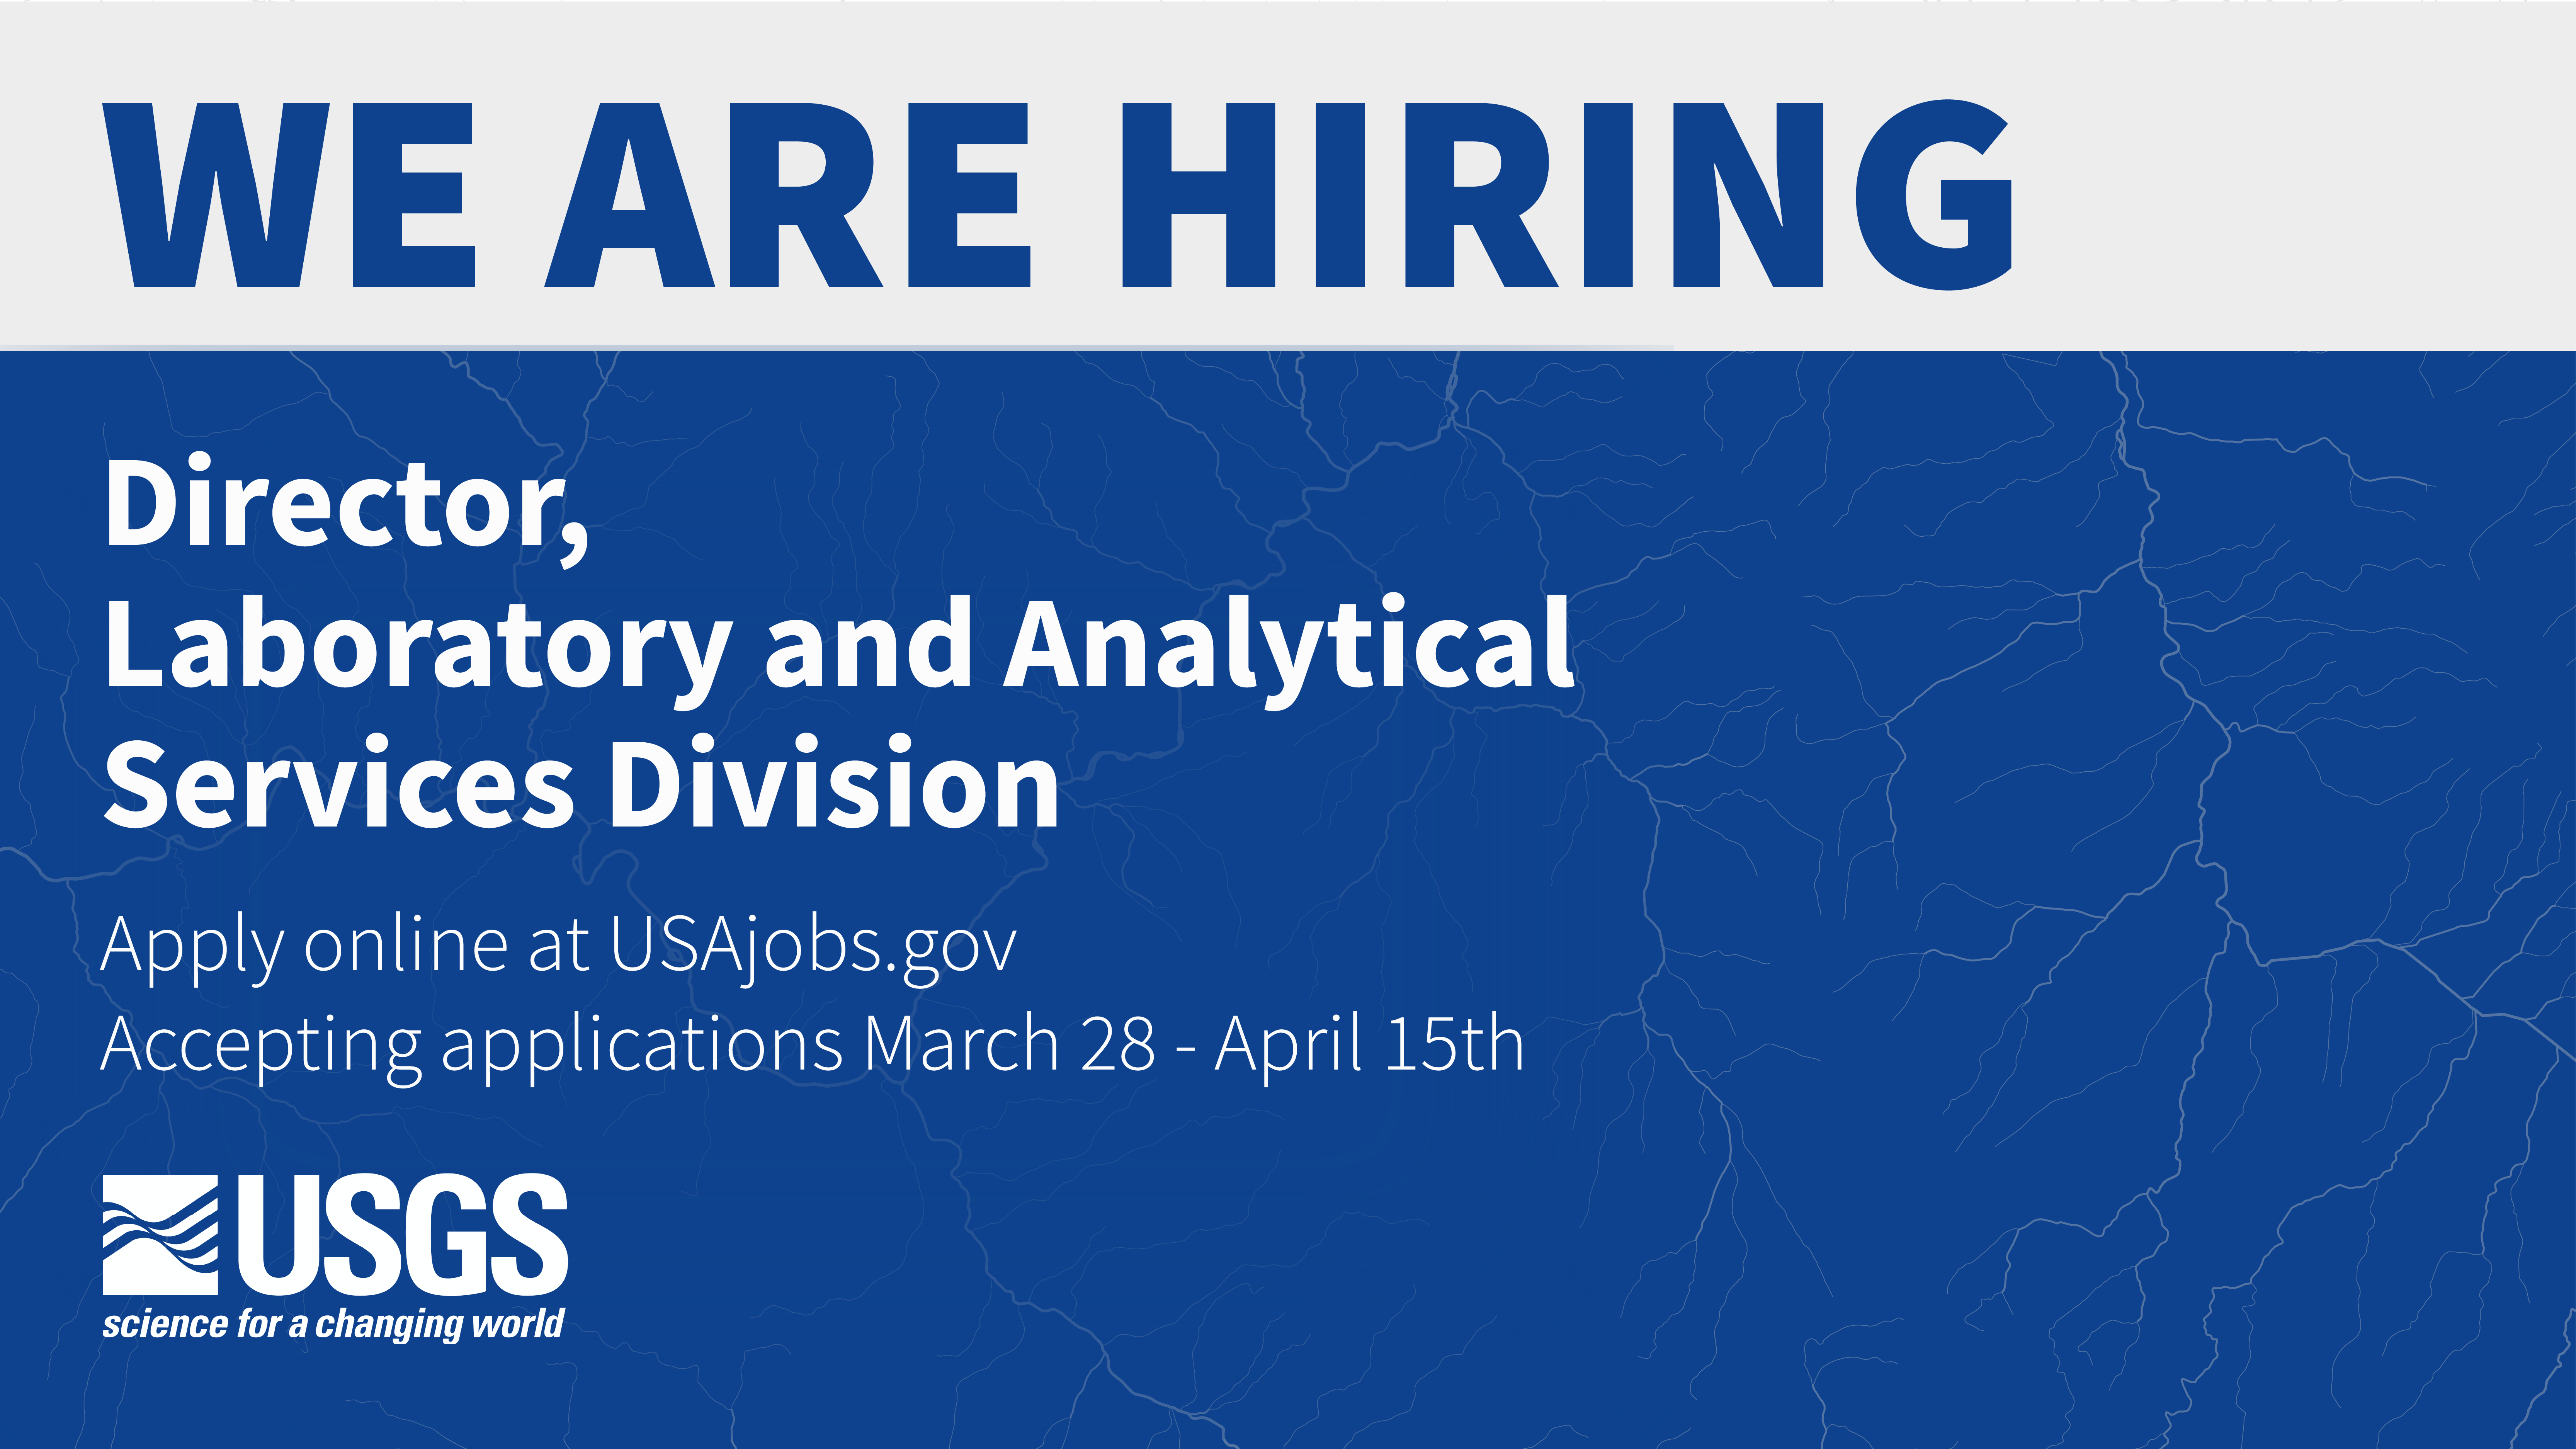 A banner announcing that the USGS Water Mission Area is hiring for the Director of the Laboratory and Analytical Services Division. Apply online at USAjobs.gov. Accepting Applications March 28th-April 15th.